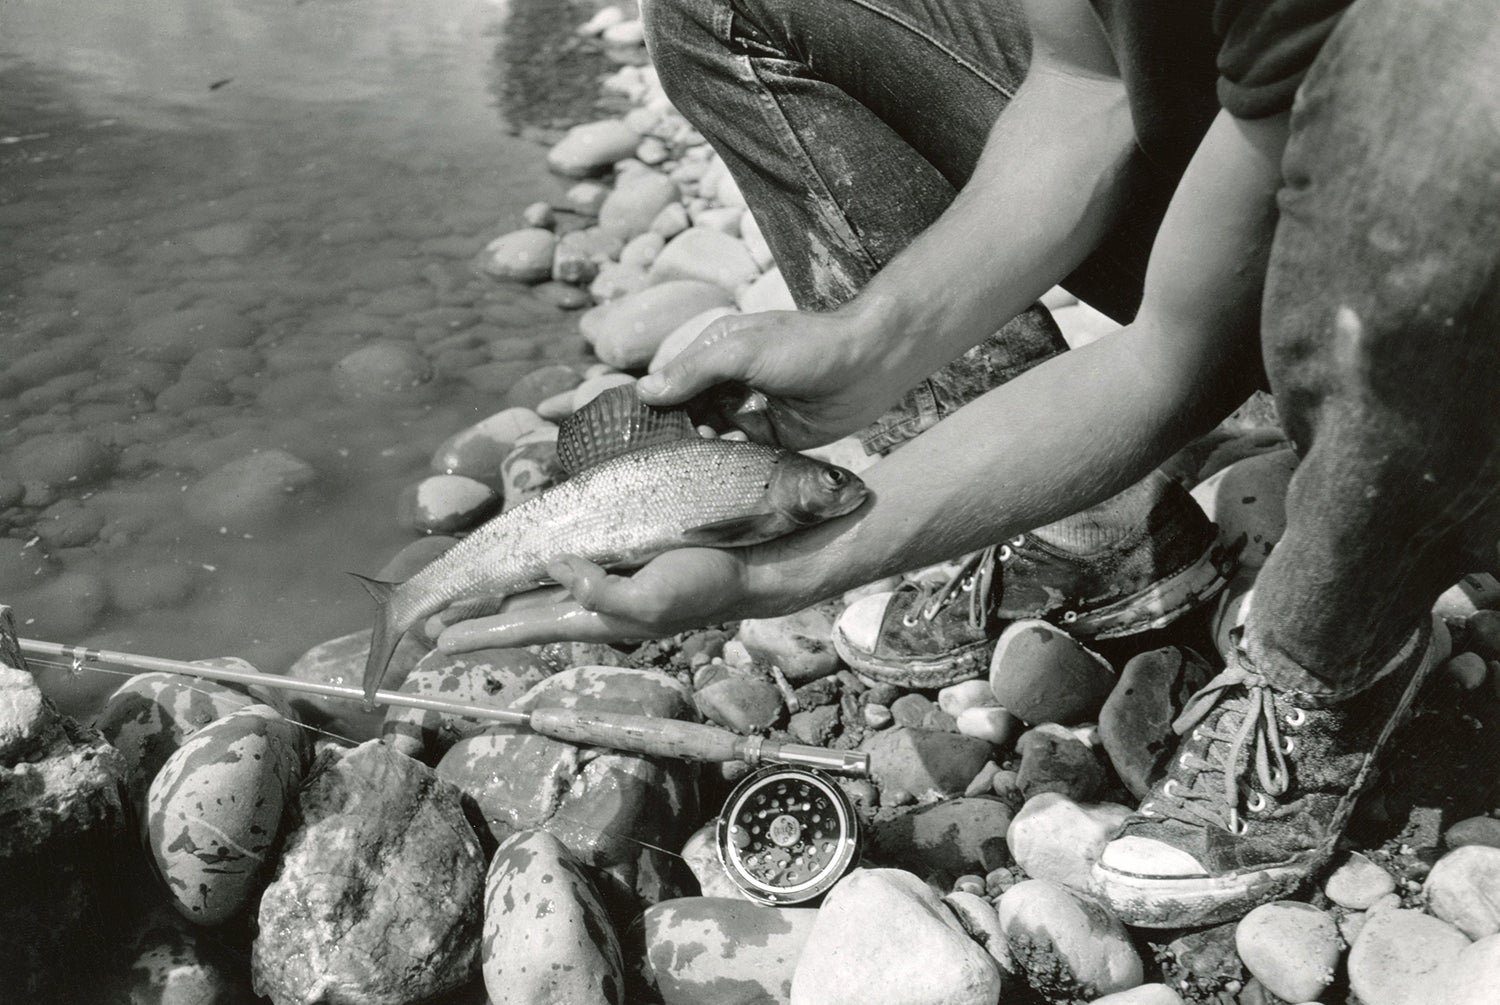 crouching angler wearing Chuck Taylor sneakers holds grayling while fly rod and reel rest on rocks